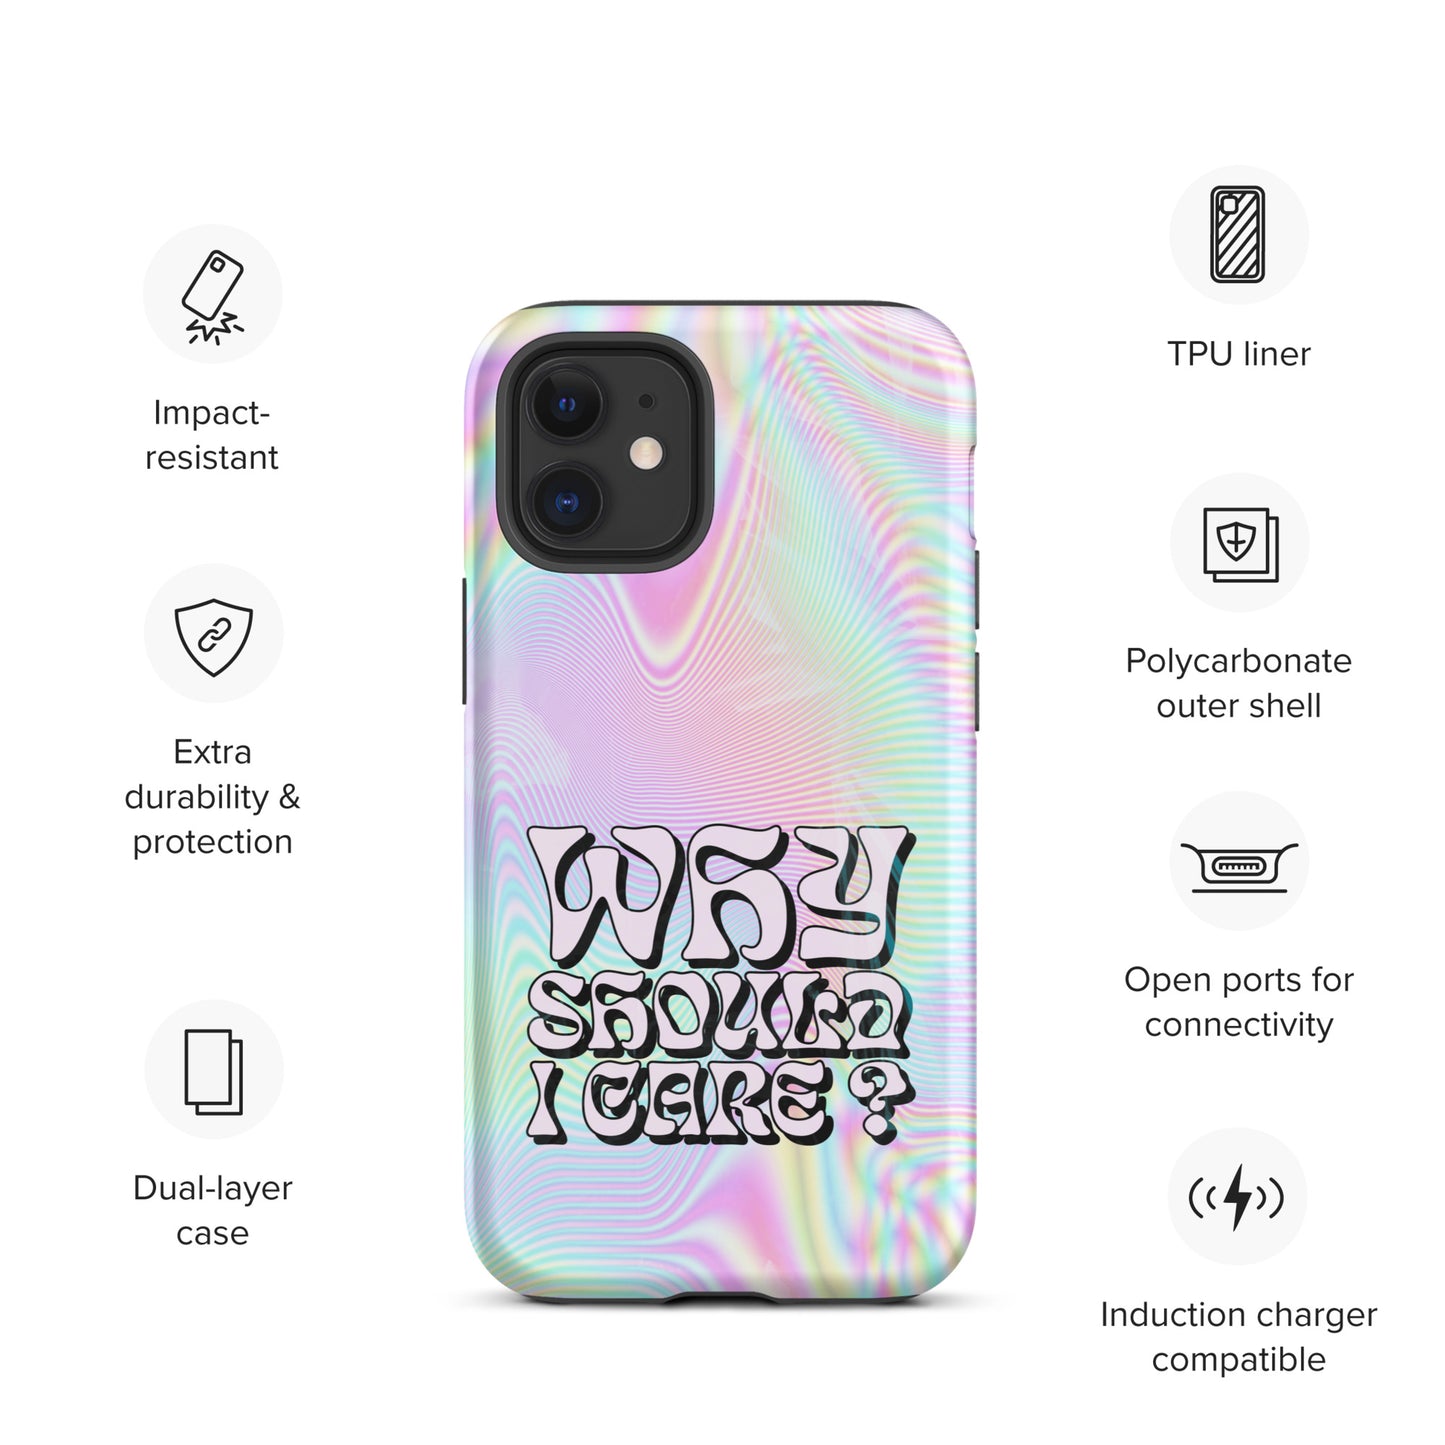 WHY SHOULD I? - Tough iPhone case